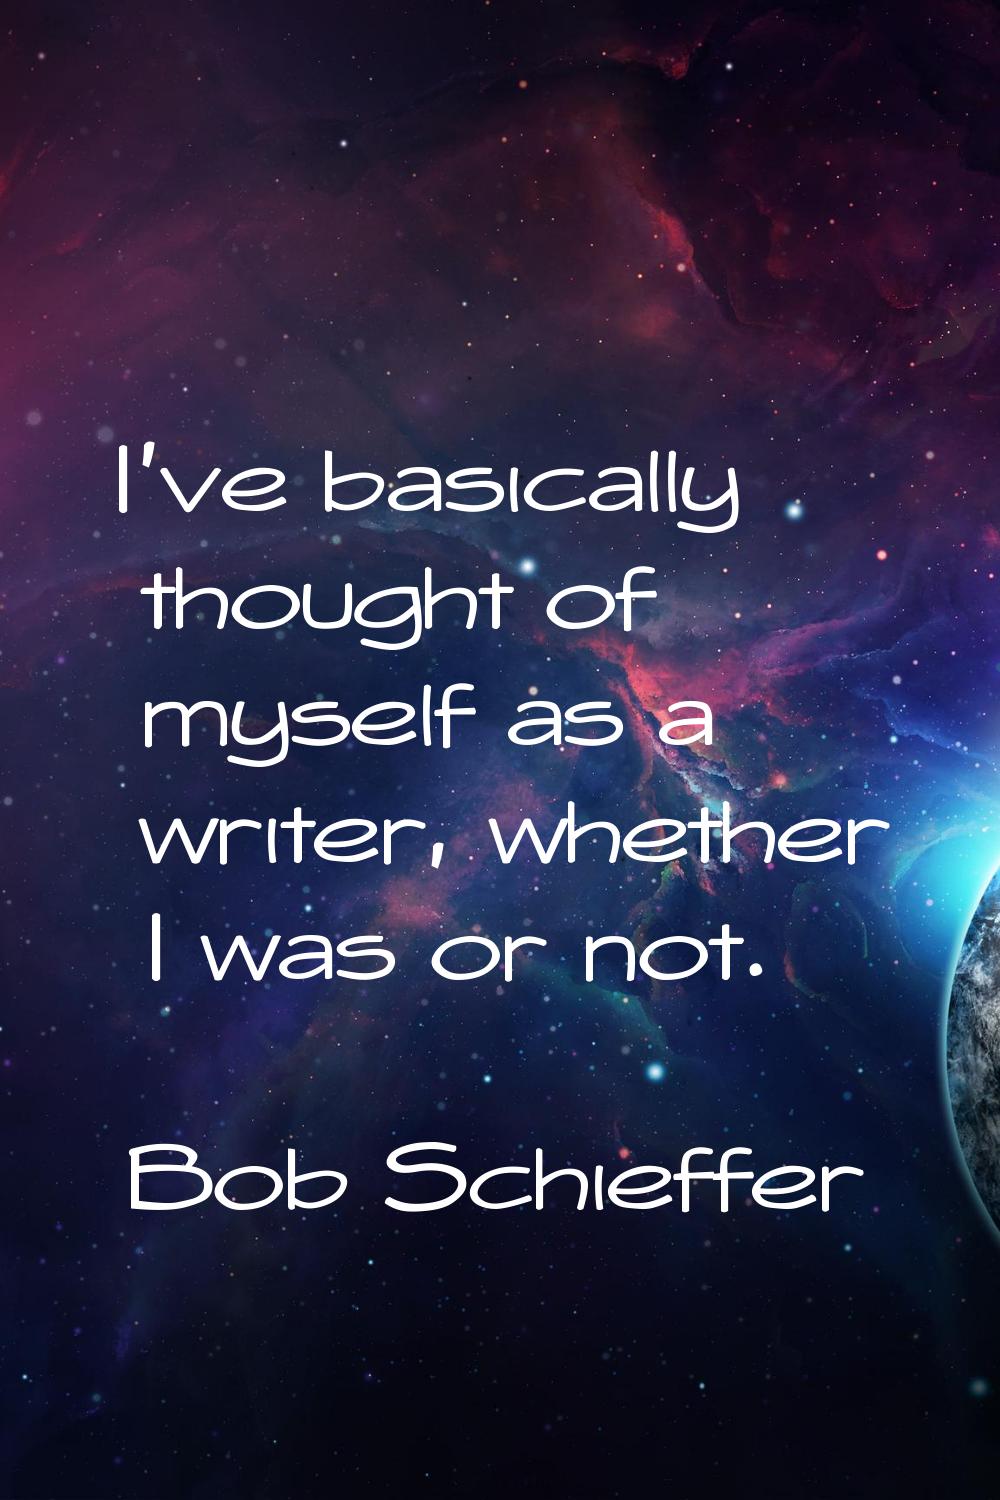 I've basically thought of myself as a writer, whether I was or not.